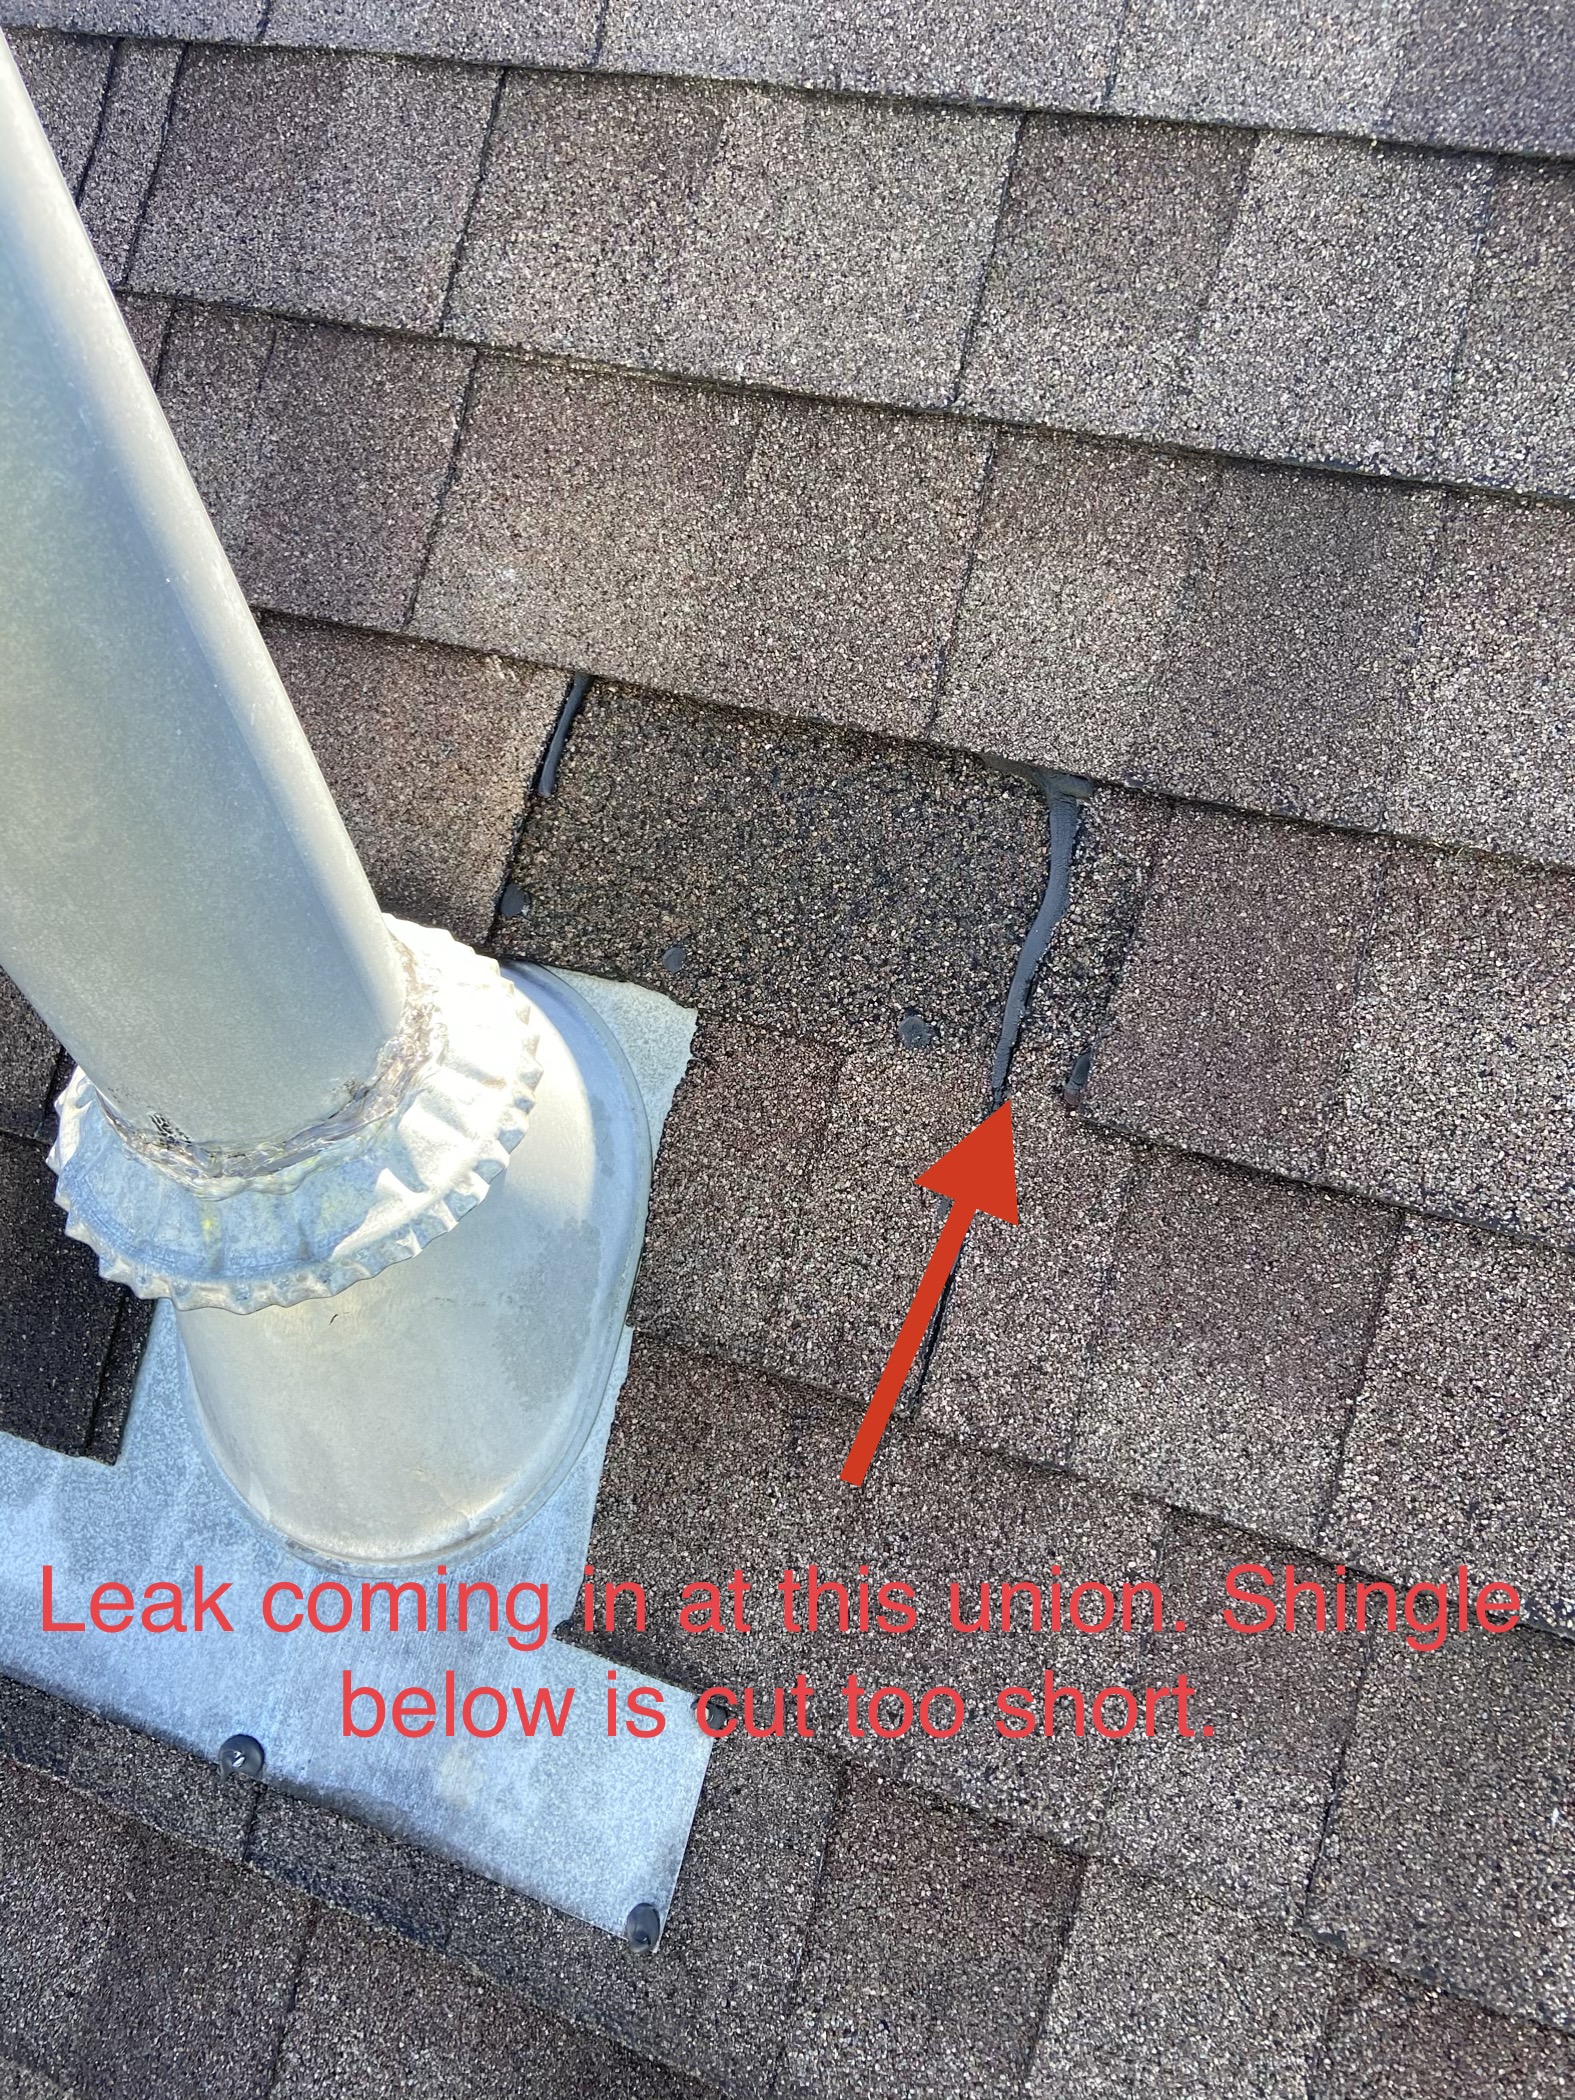 This is a picture of a shingle that is brown in color where a roof leak is occurring